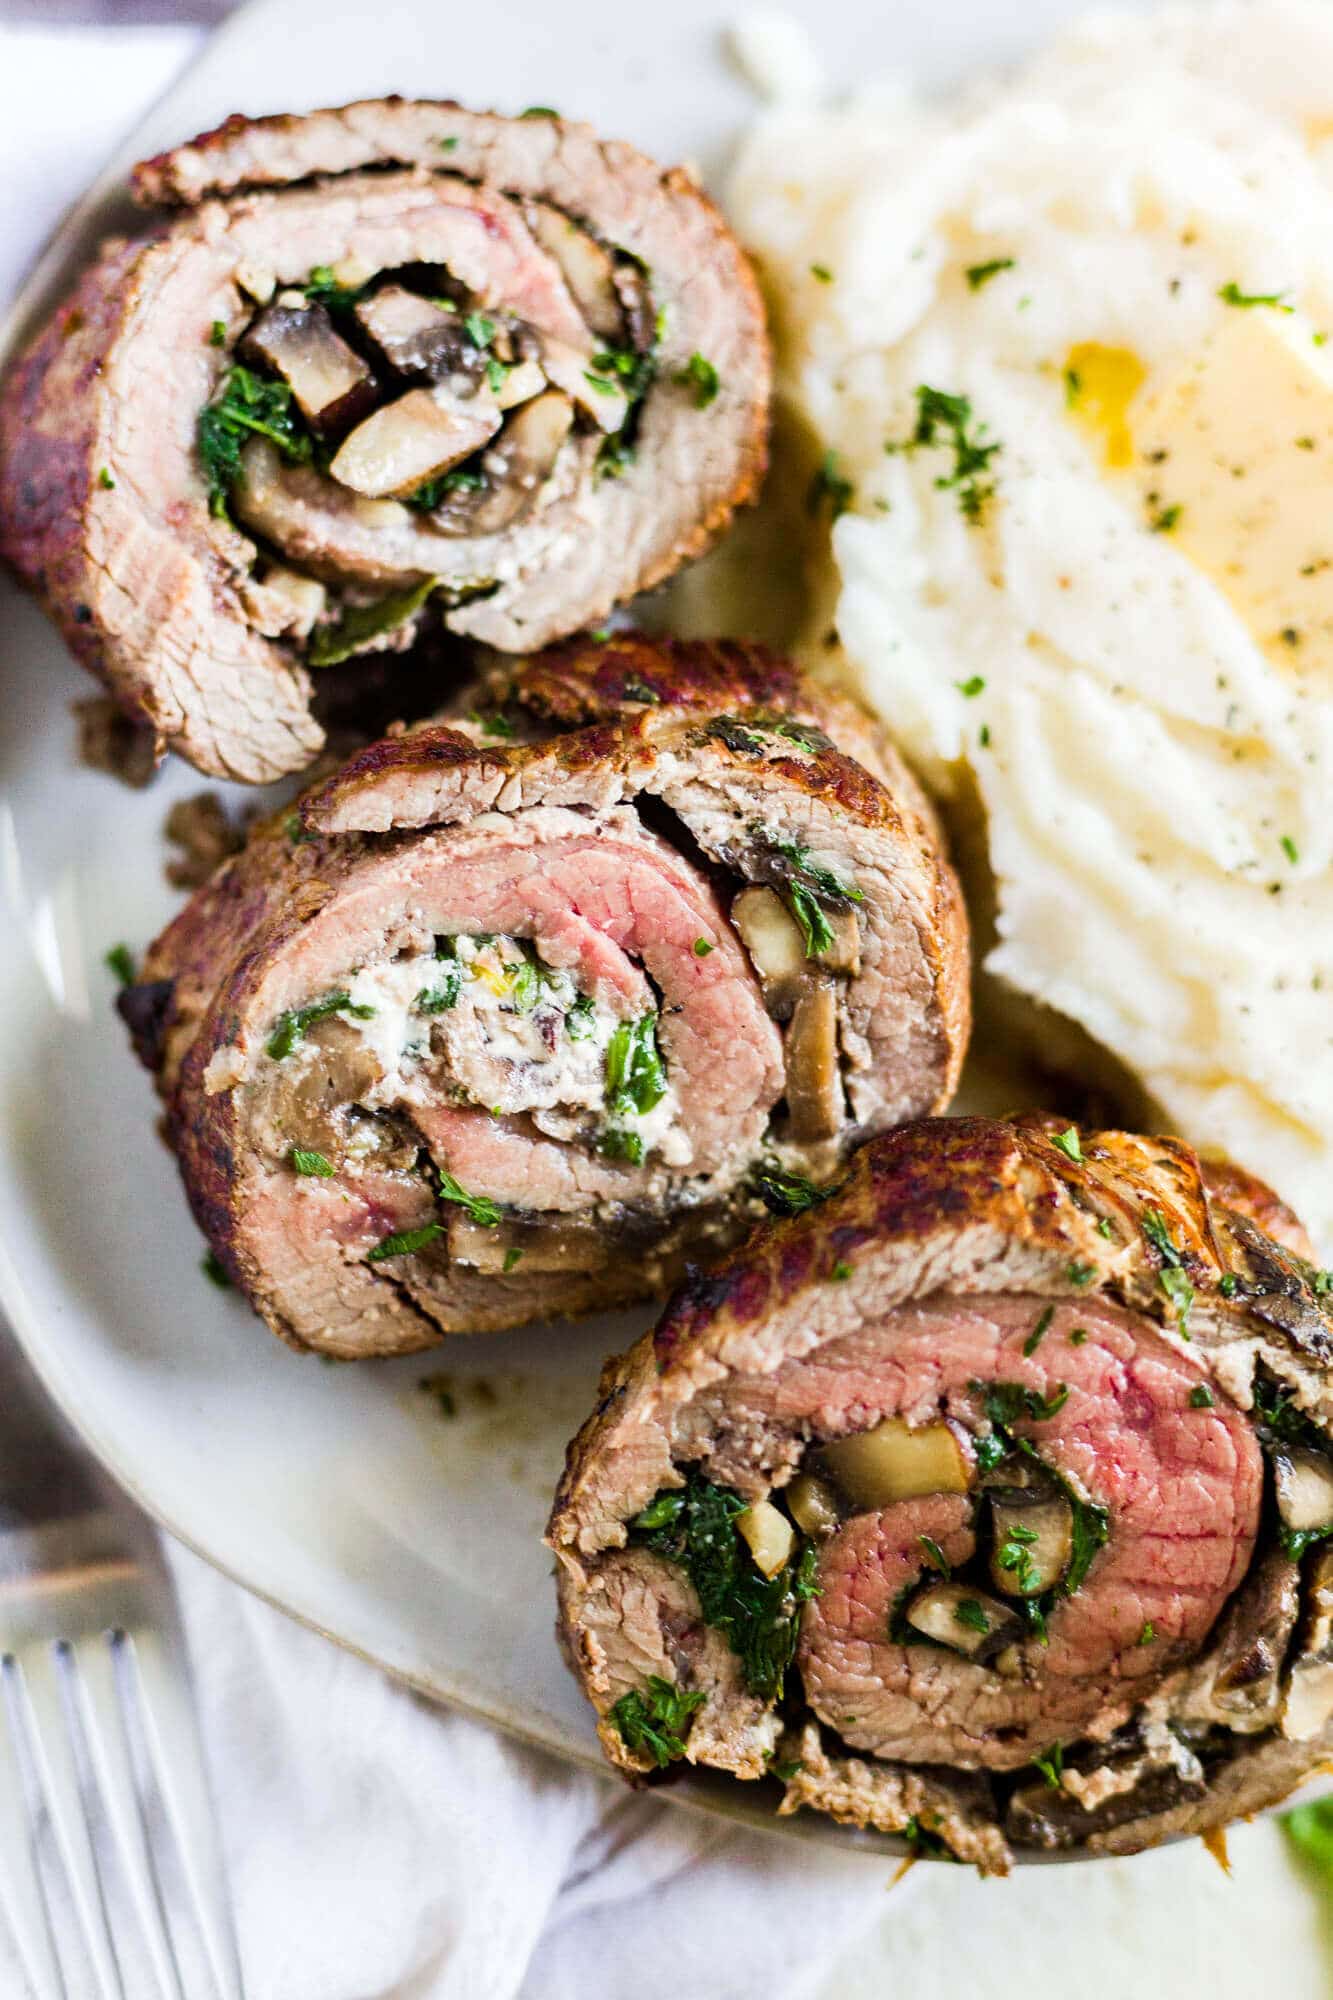 rolled and stuffed flank steak on a dinner plate with mashed potatoes